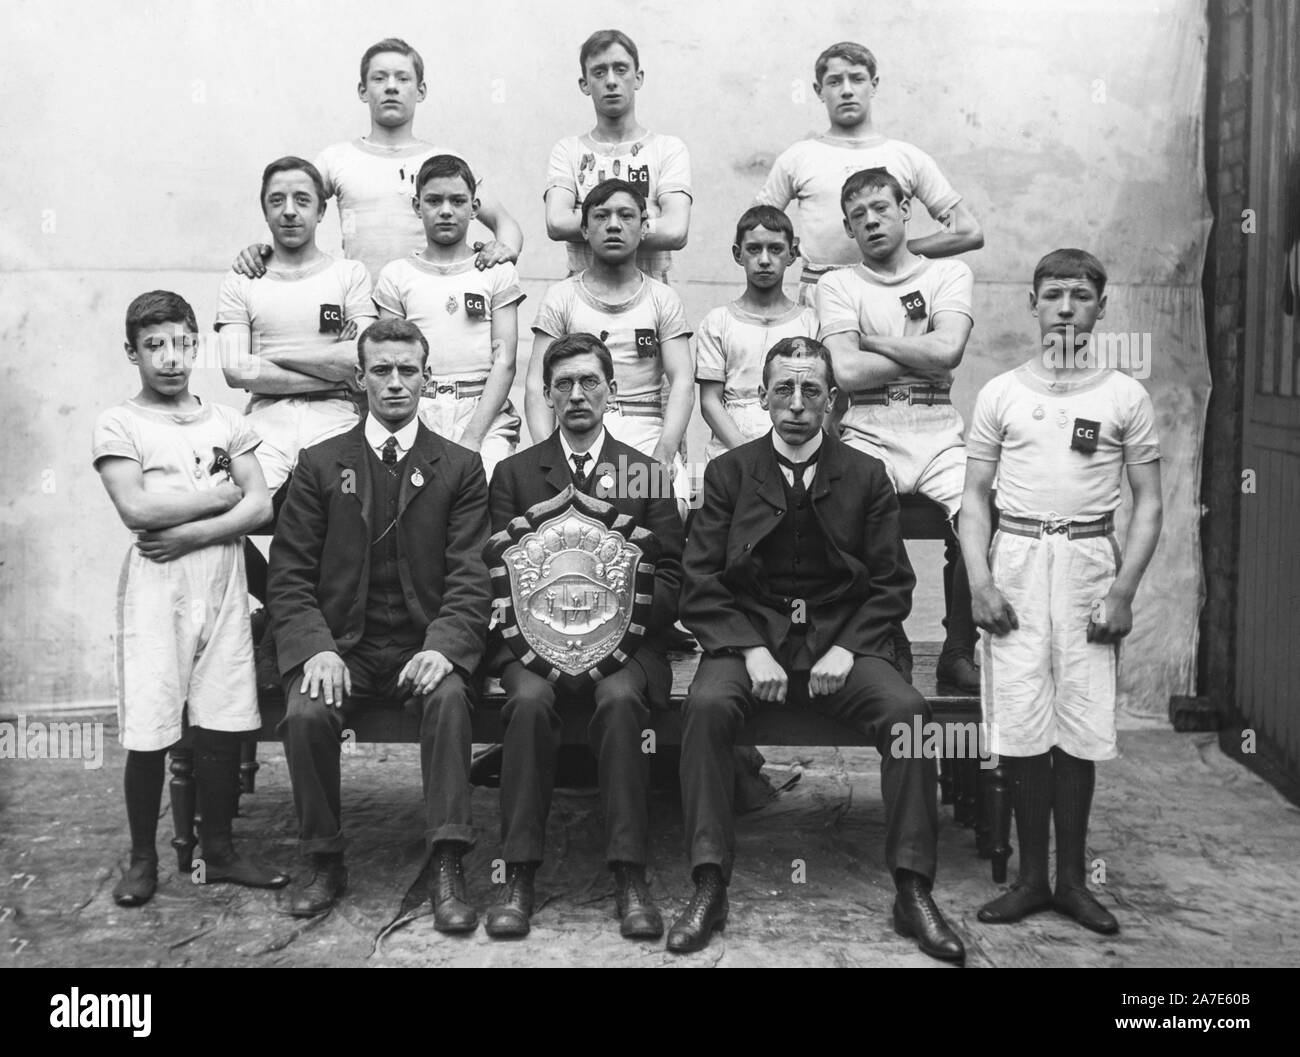 A vintage late Victorian early Edwardian black and white photograph showing a group of young English boy gymnasts posing for a camera whilst their coach or manager shows a large trophy shield. Stock Photo